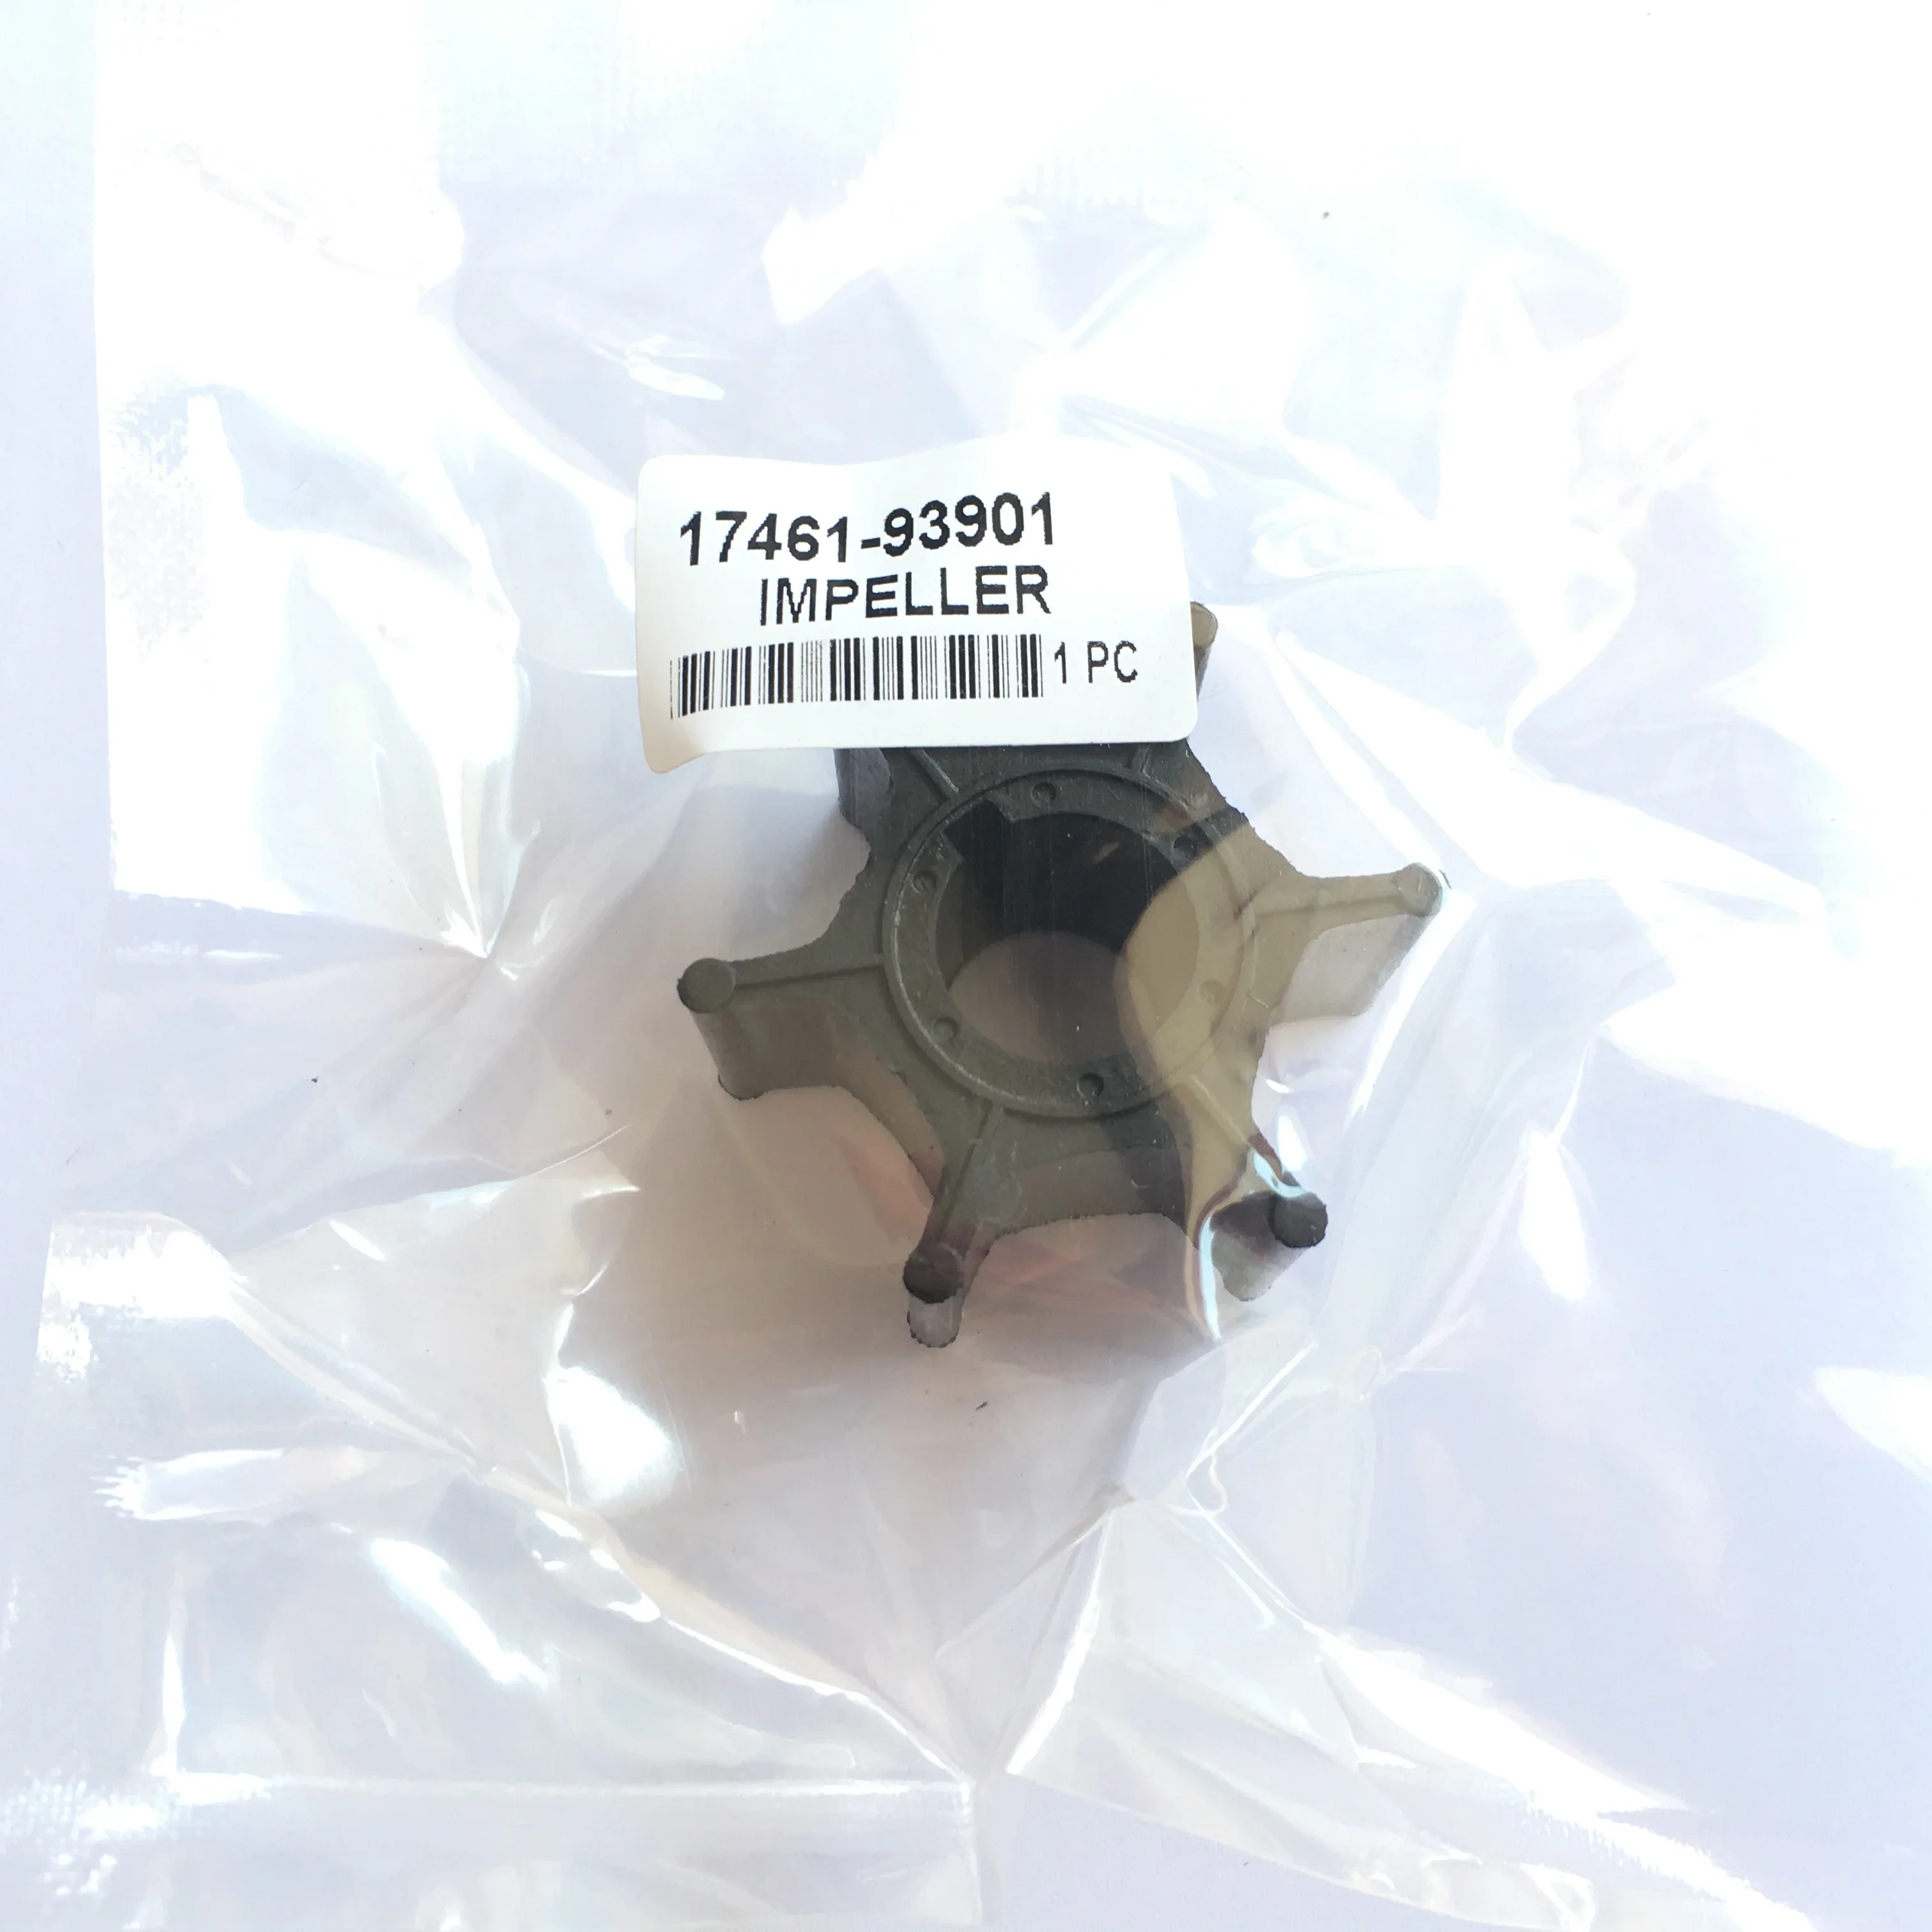 

17461-93901 17461-93902 17461-93903 18-3099 Outboard Engine Water Impeller for Suzuki 9.9hp 15hp DT15 DT9.9 Boat Motor Parts